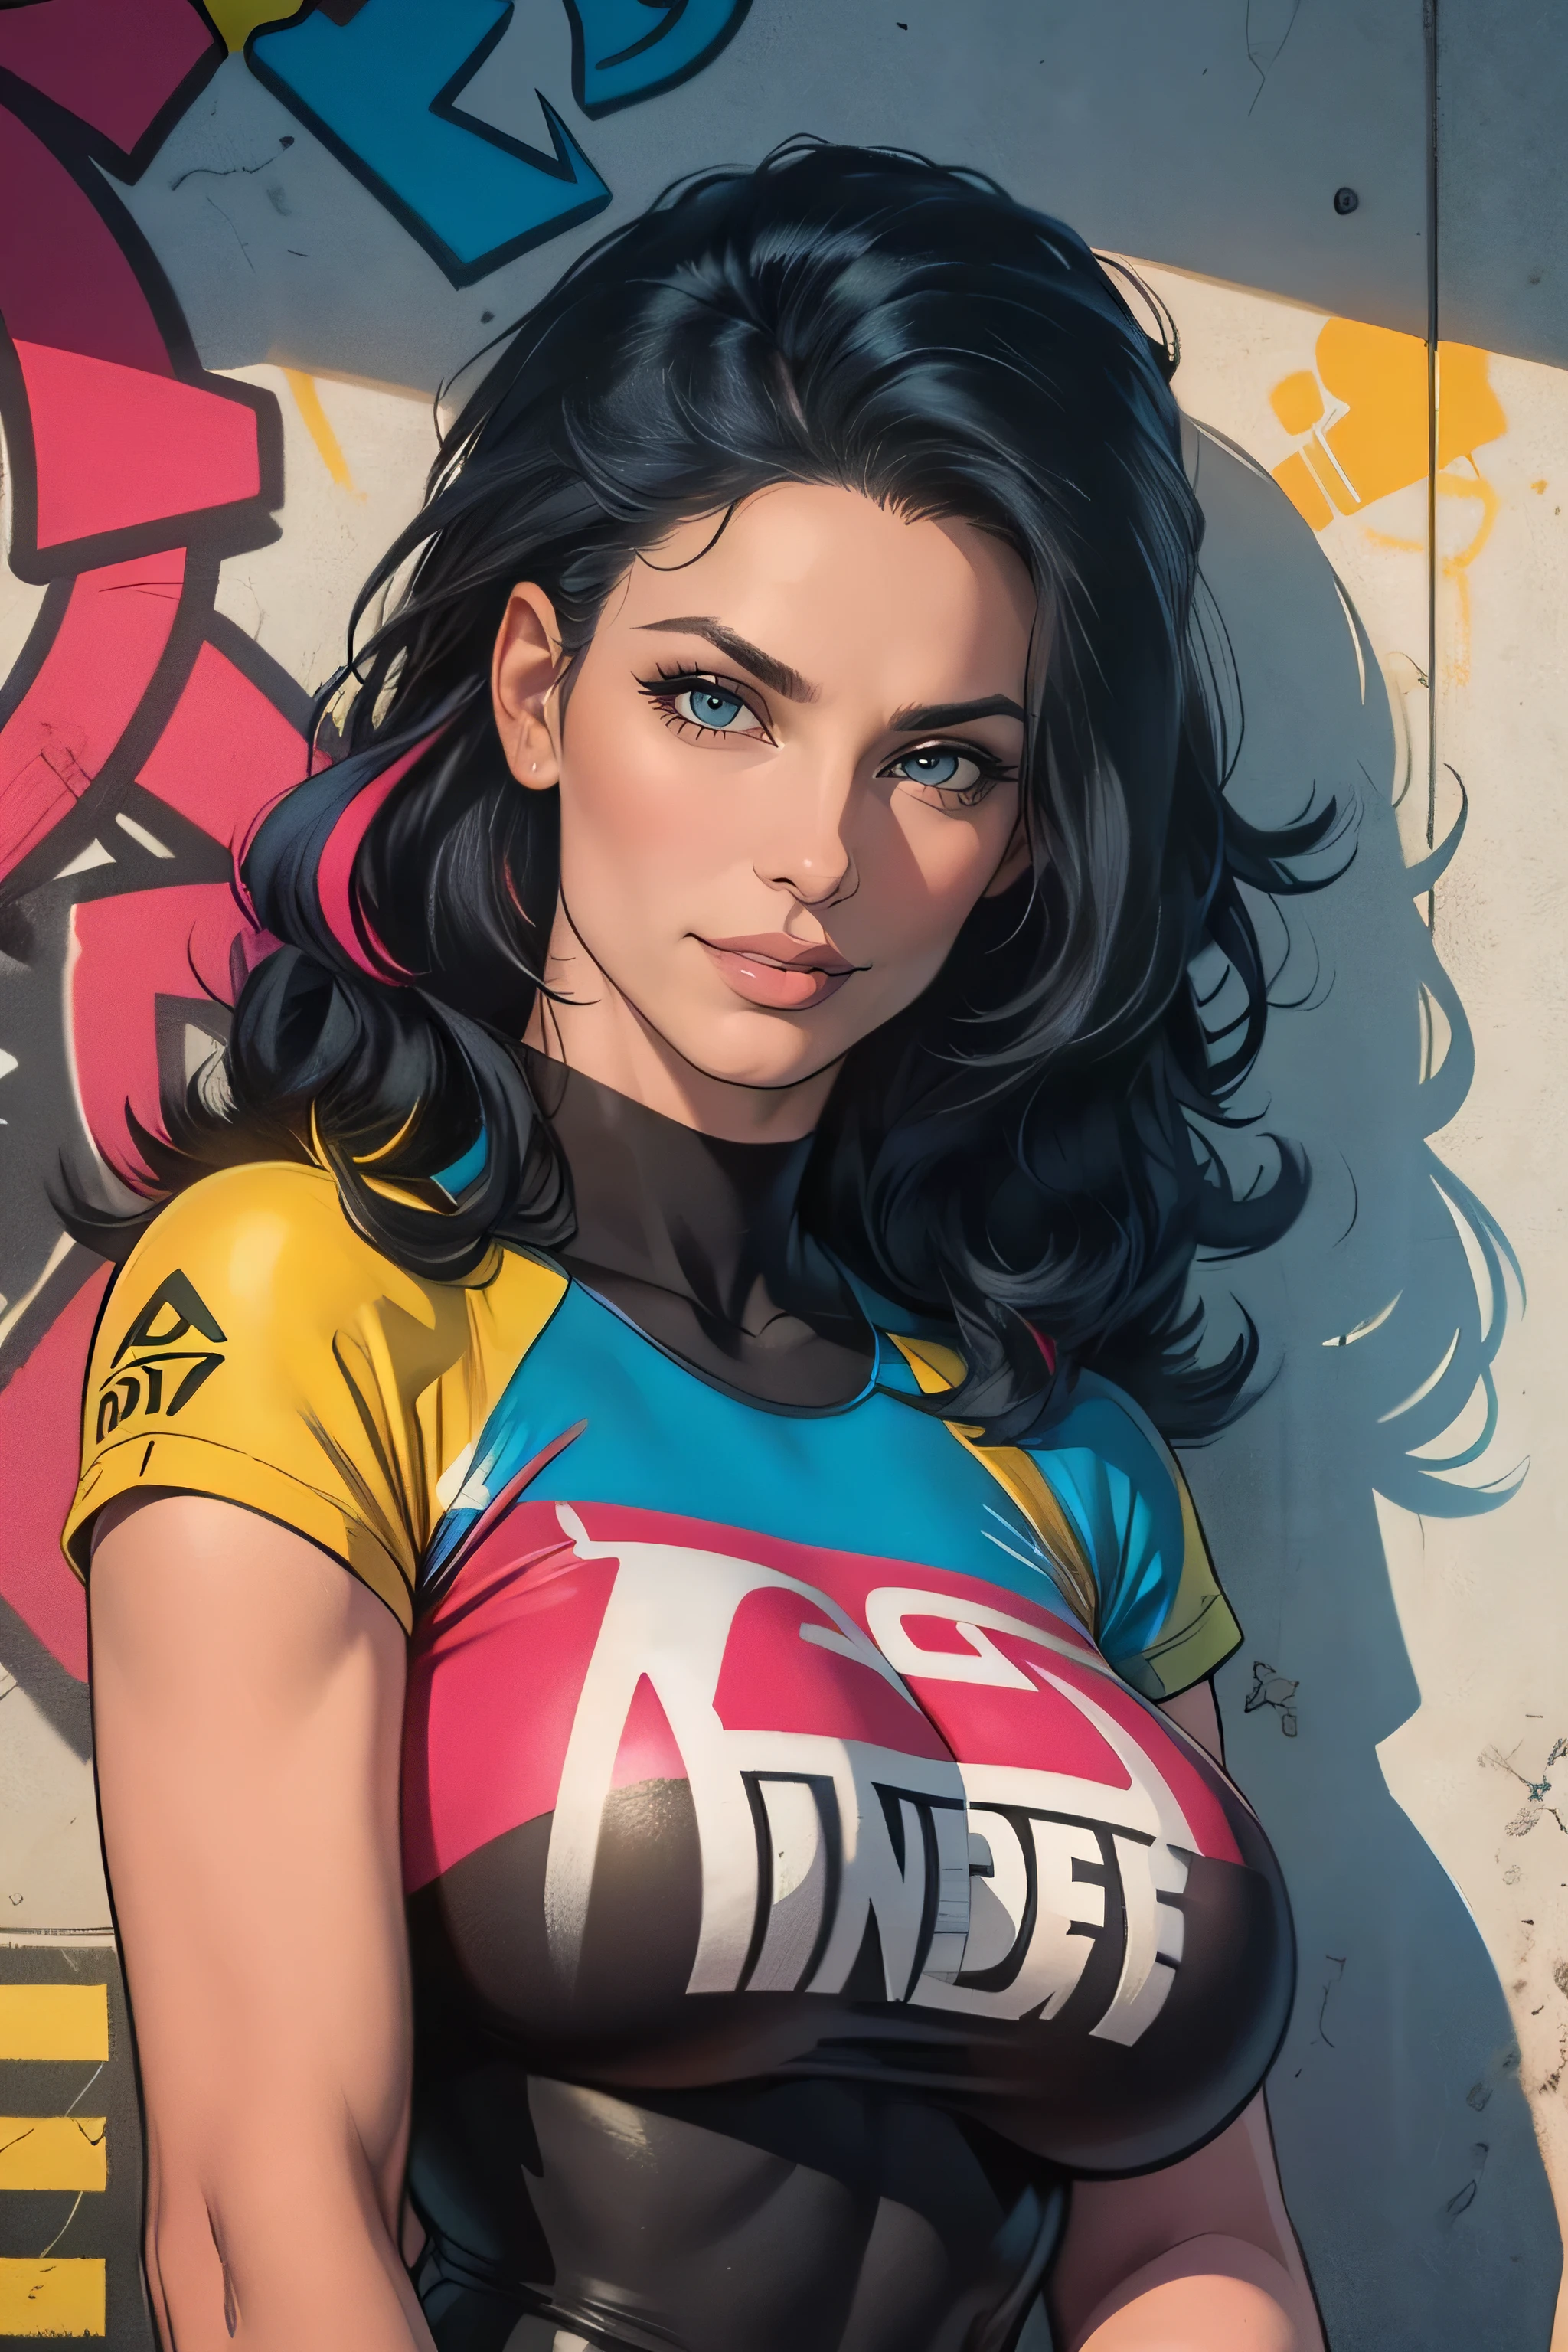 (best quality), masterpiece, extremely detailed CG uniform 8K illustration, high color, extremely high color saturation, all colors deepened, paint, graffiti art, center composition, extremely detailed light and shadow, graffiti wall, wall painted bright, 1 girl graffiti 1 girl looking at the wall, extremely detailed face and eyes, medium length hair, sportswear, colored clouds